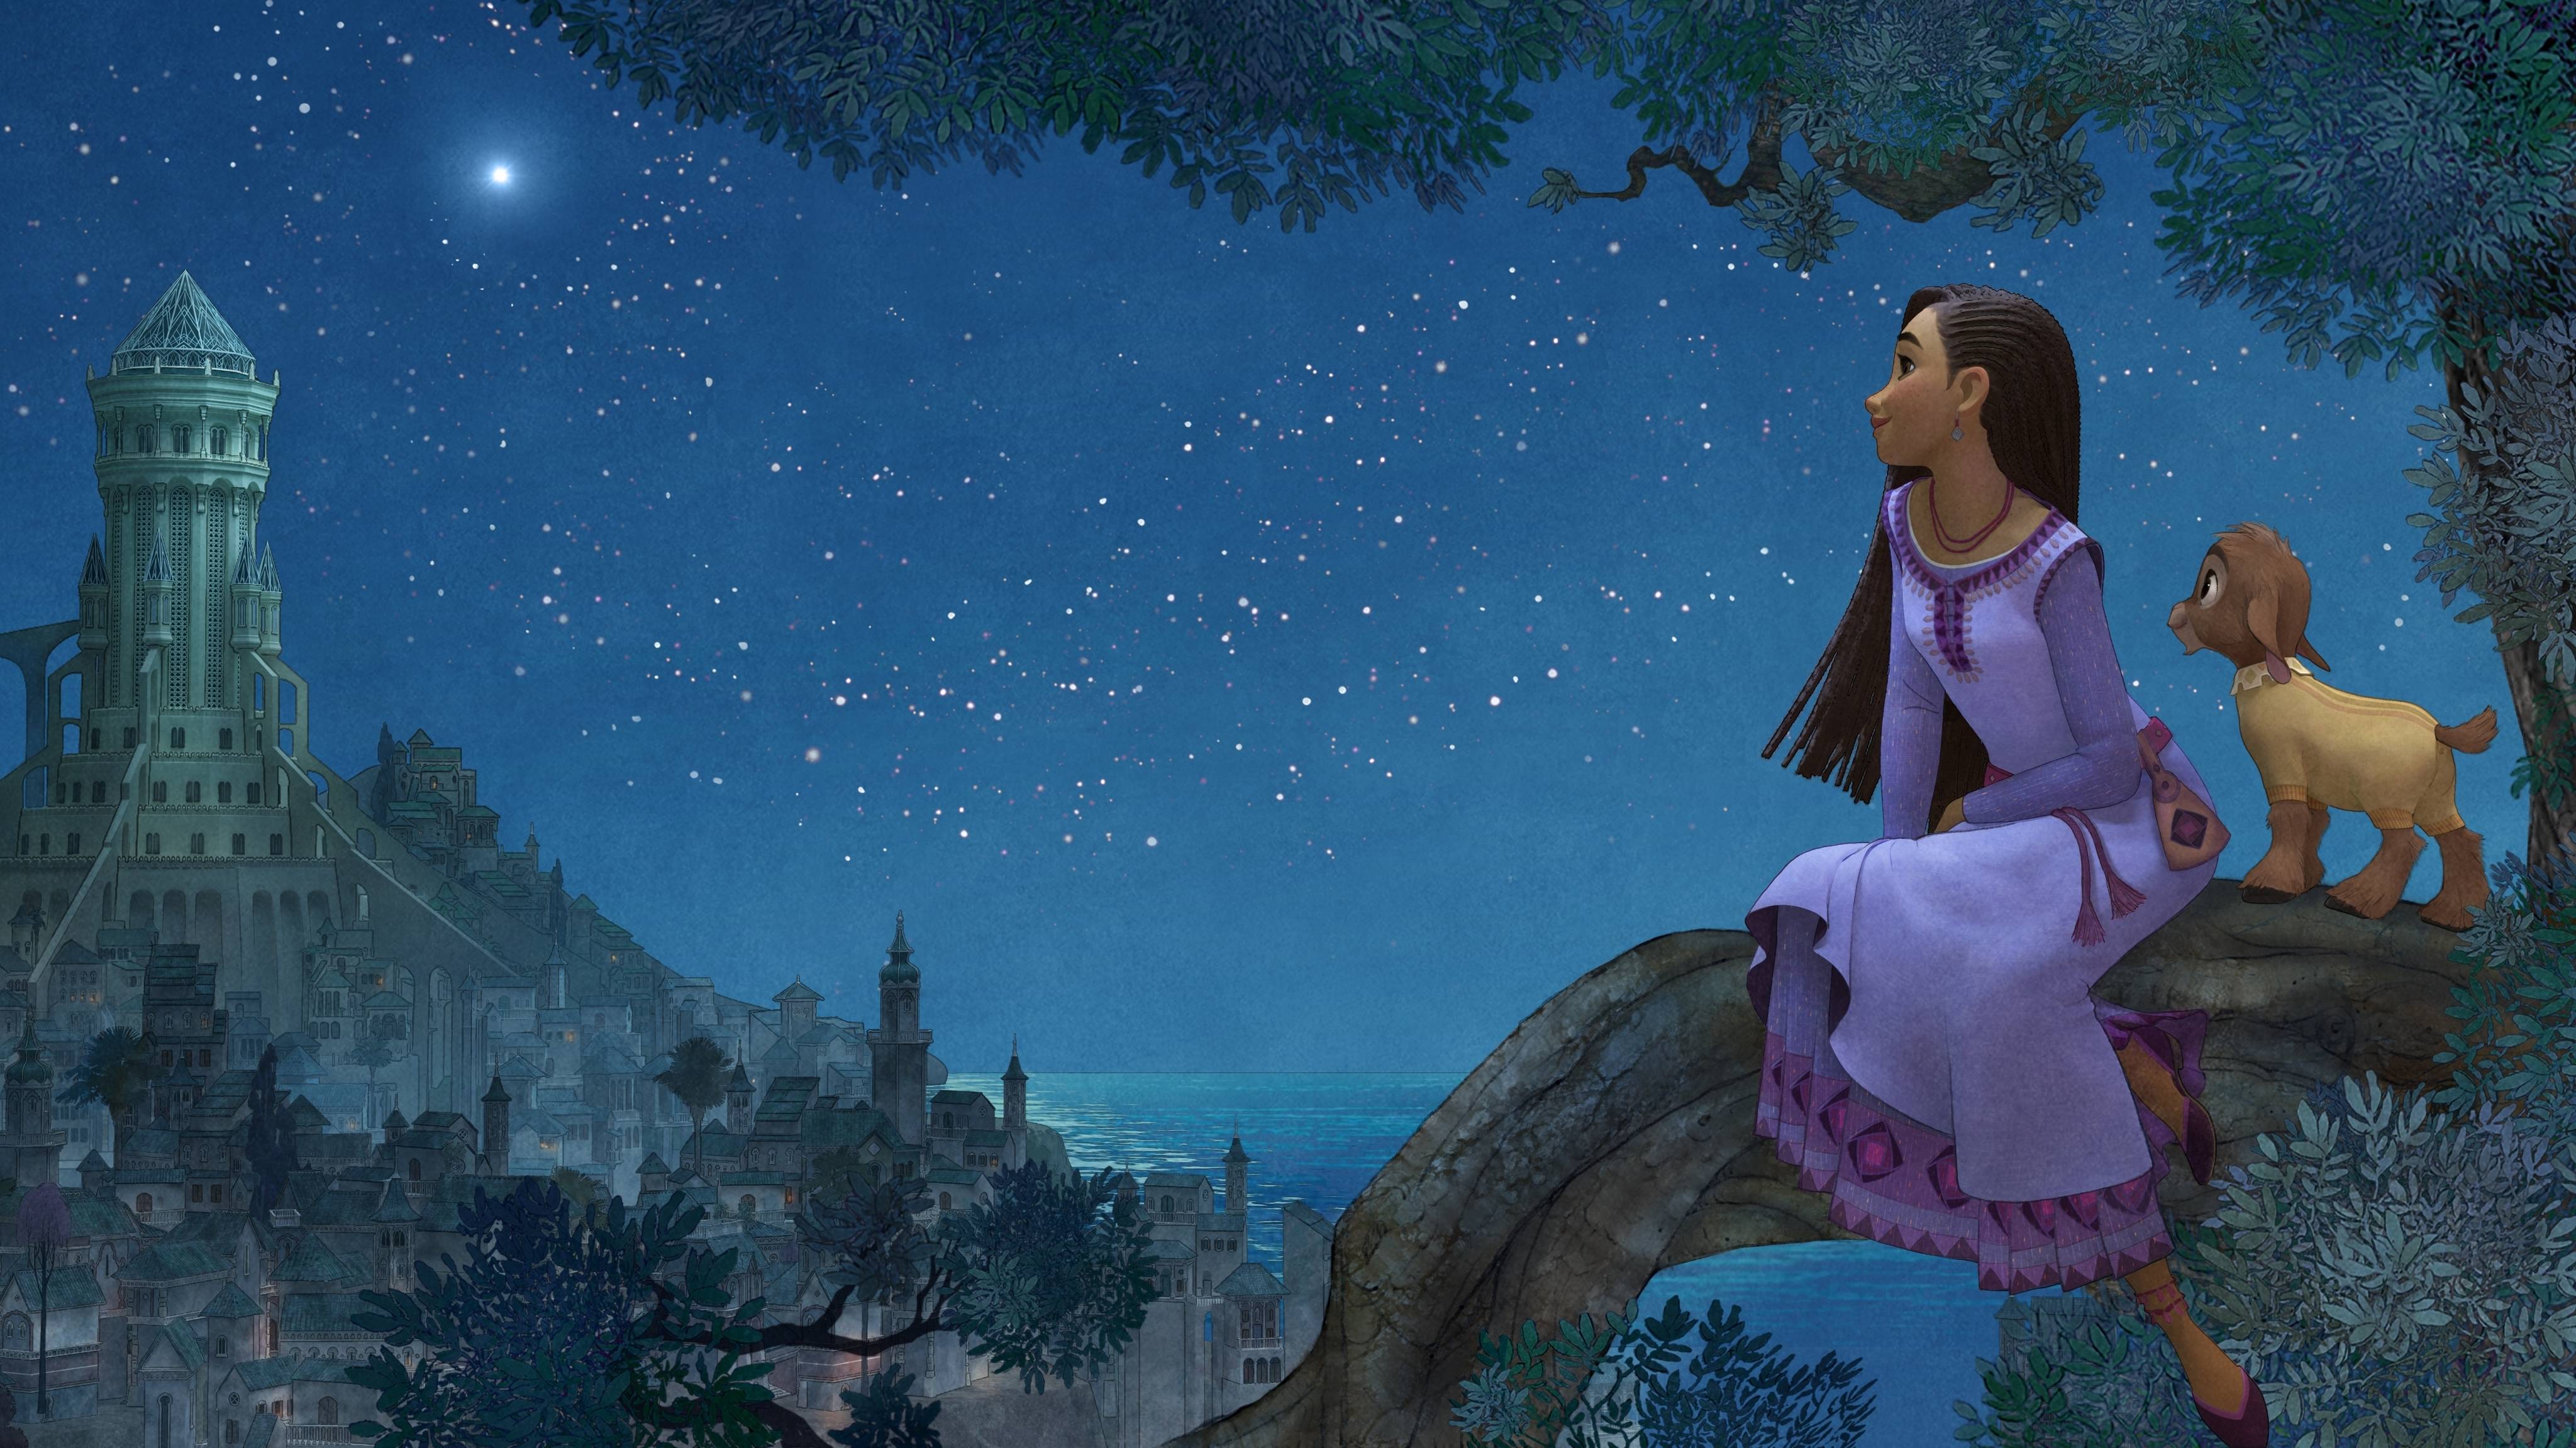 Walt Disney World casting for performers to play Asha from the upcoming animated musical 'Wish'